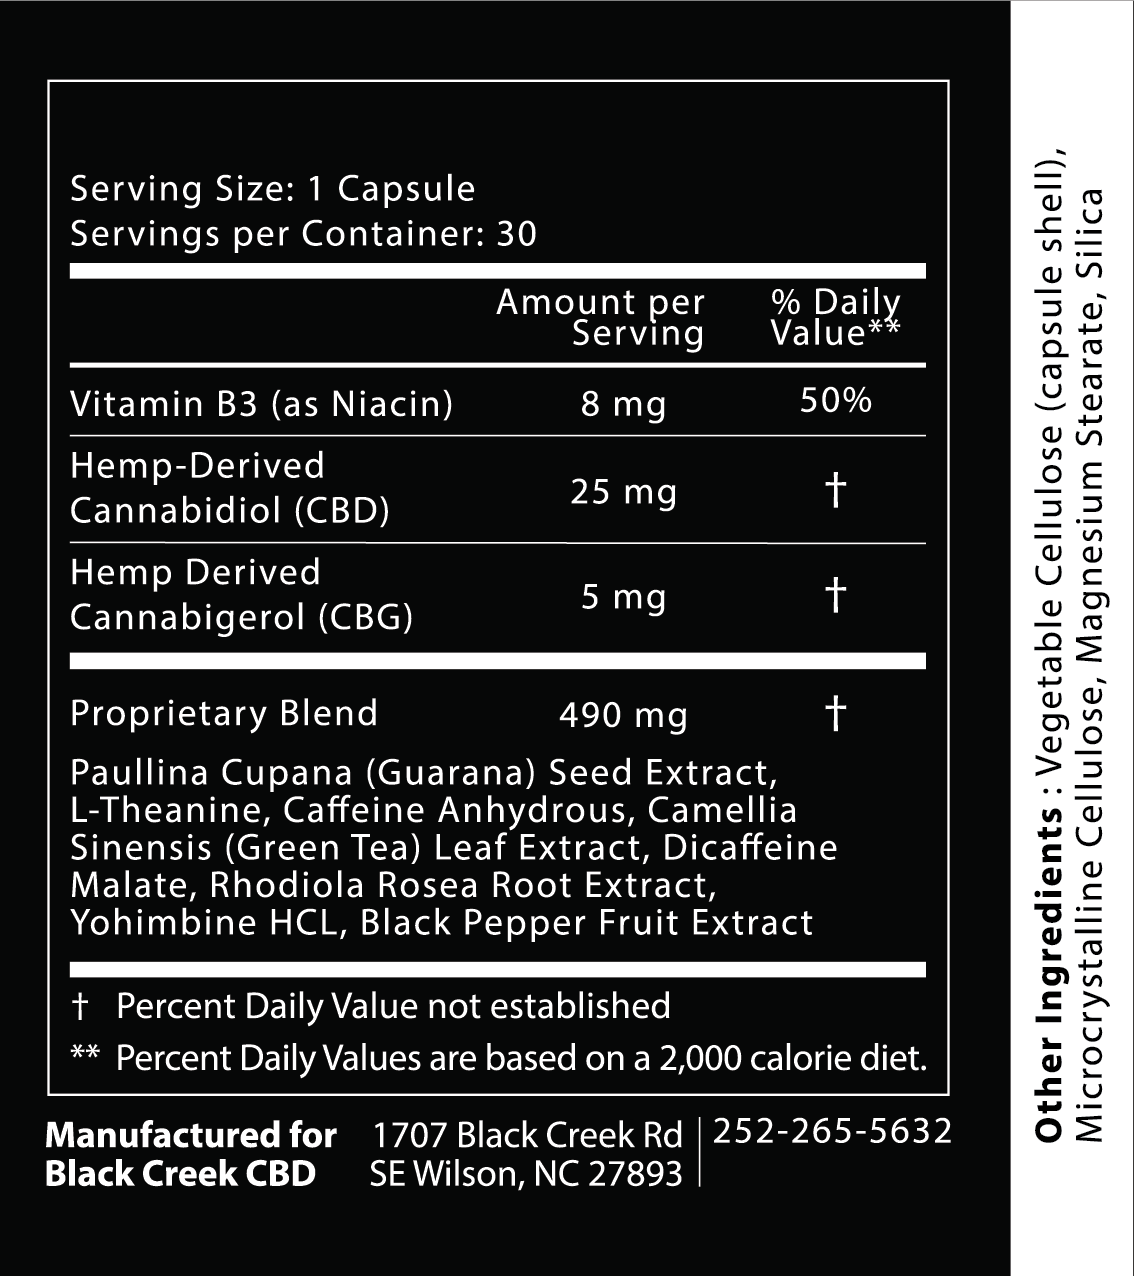 The Supplement Facts panel for the Black Creek CBD Energy Capsules. It lists Vitamin B3, Hemp-Derived Cannabidiol, Hemp Derived Cannabigerol, a proprietary blend of Paullina Cupana Seed Extract, L-Theanine, Caffeine Anhydrous, Camellia Sinensis Leaf Exxtract, Dicaffeine Malate, Rhodiola Rosea Root Extract, Yohimbine HCL, Black Pepper Fruit Extract. Other Ingredients, Vegetable Cellulose, Microcrystalline Cellulose, Magnesium Stearate, Silica